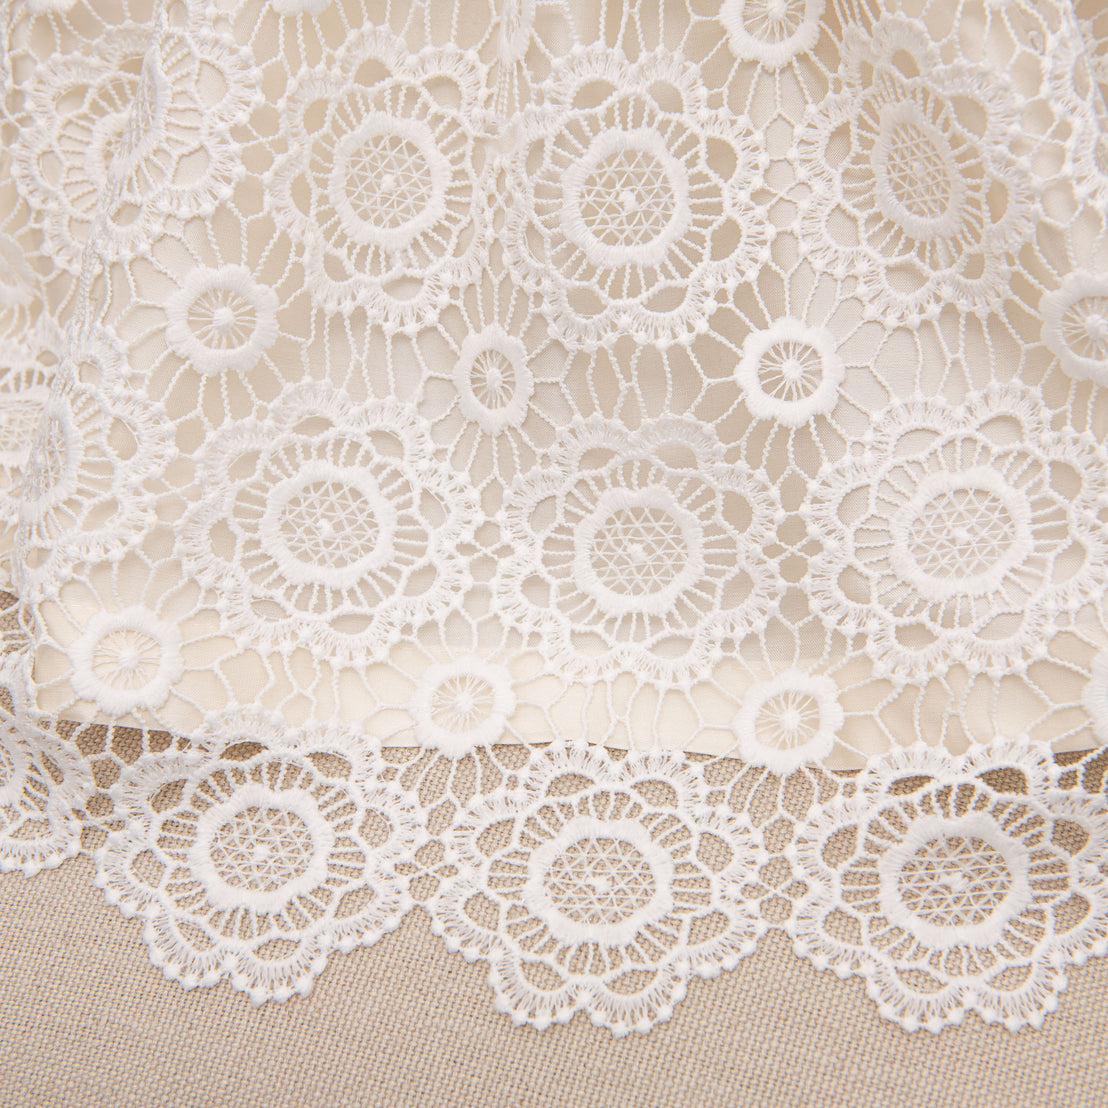 Product detail of the see-through hem of the Poppy lace christening dress.